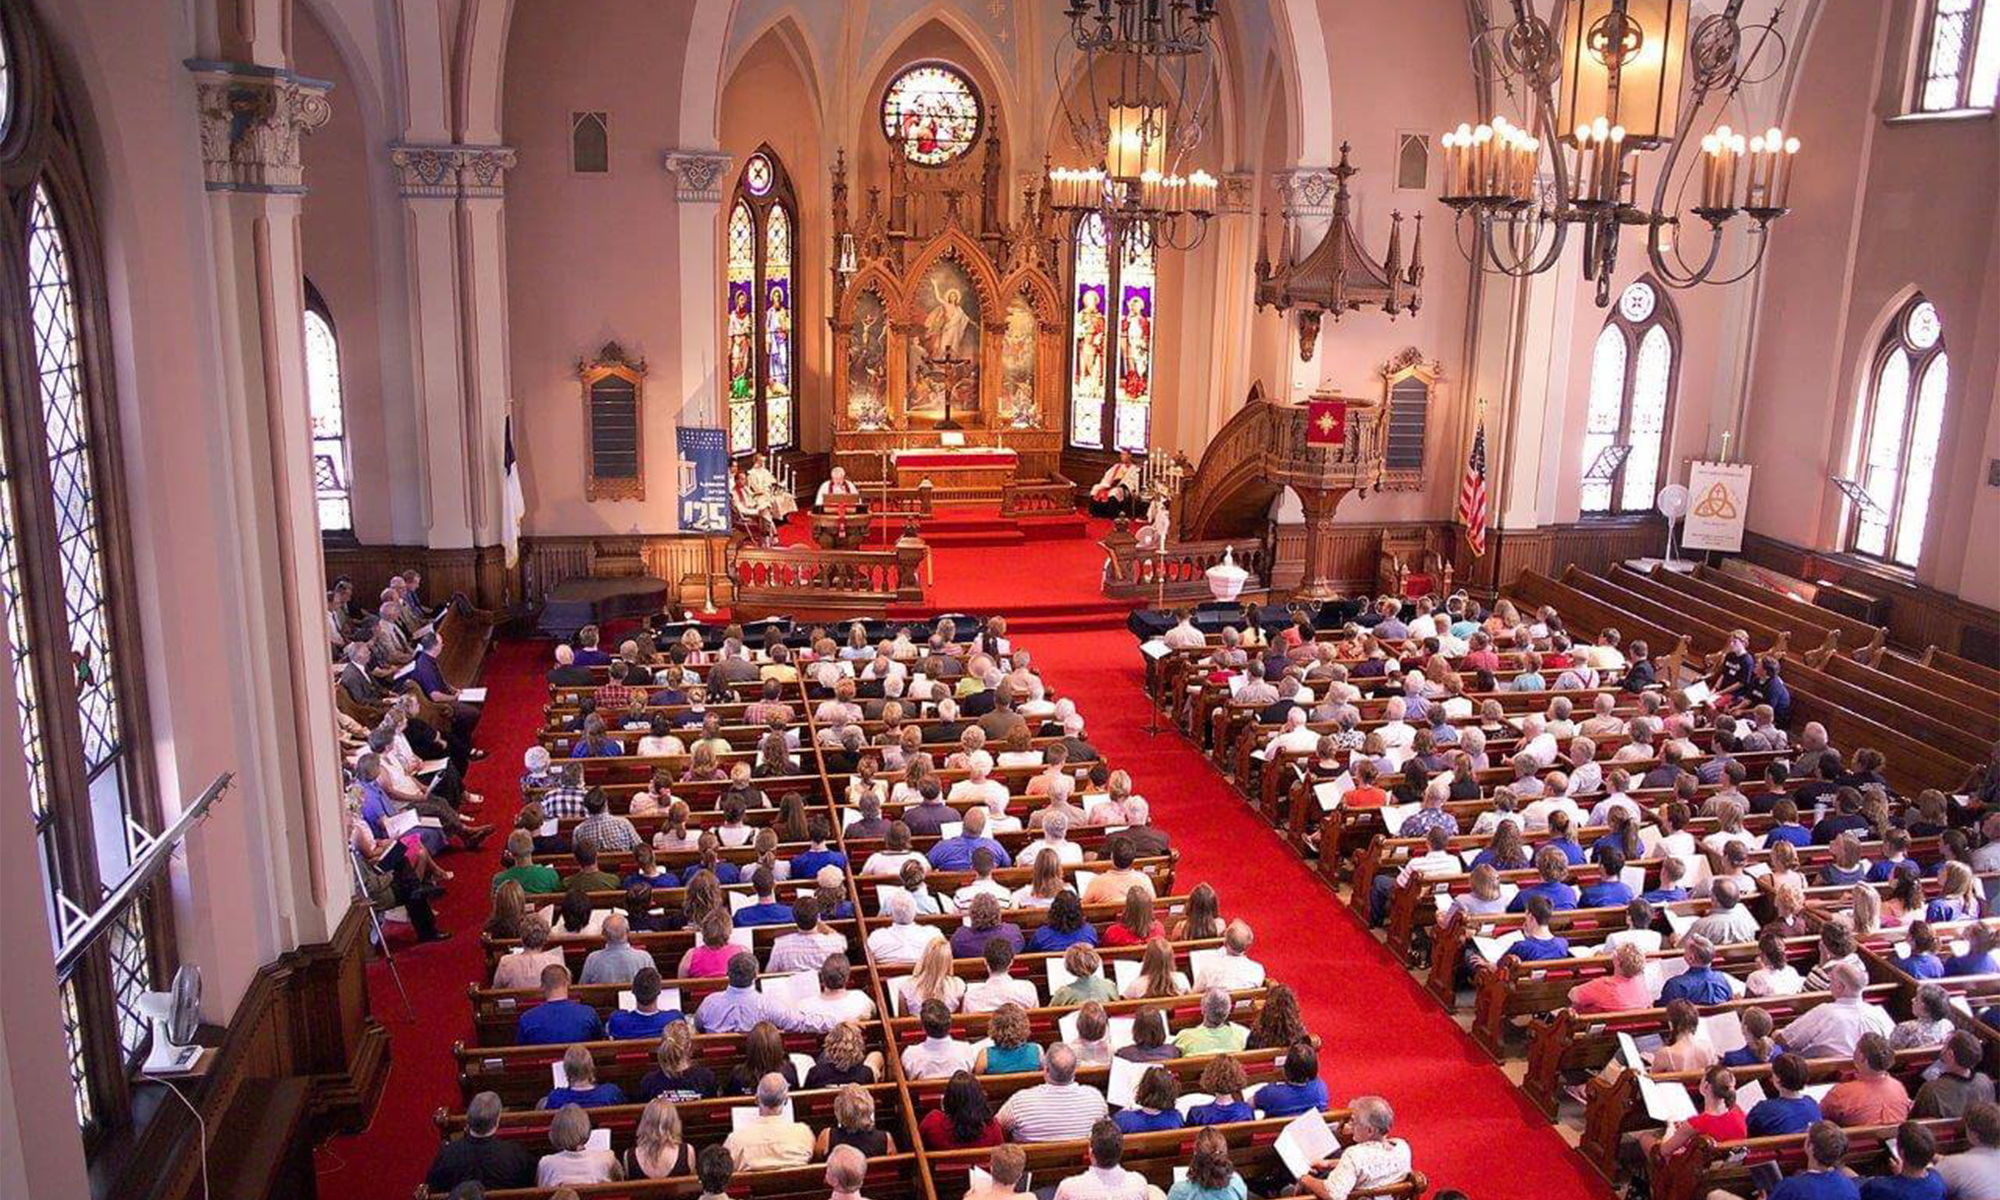 Part of Concordia's 125th anniversary celebration included a campus-wide church service at Trinity Evangelical Lutheran Church in downtown Milwaukee. The service took place Aug. 27, 2005.